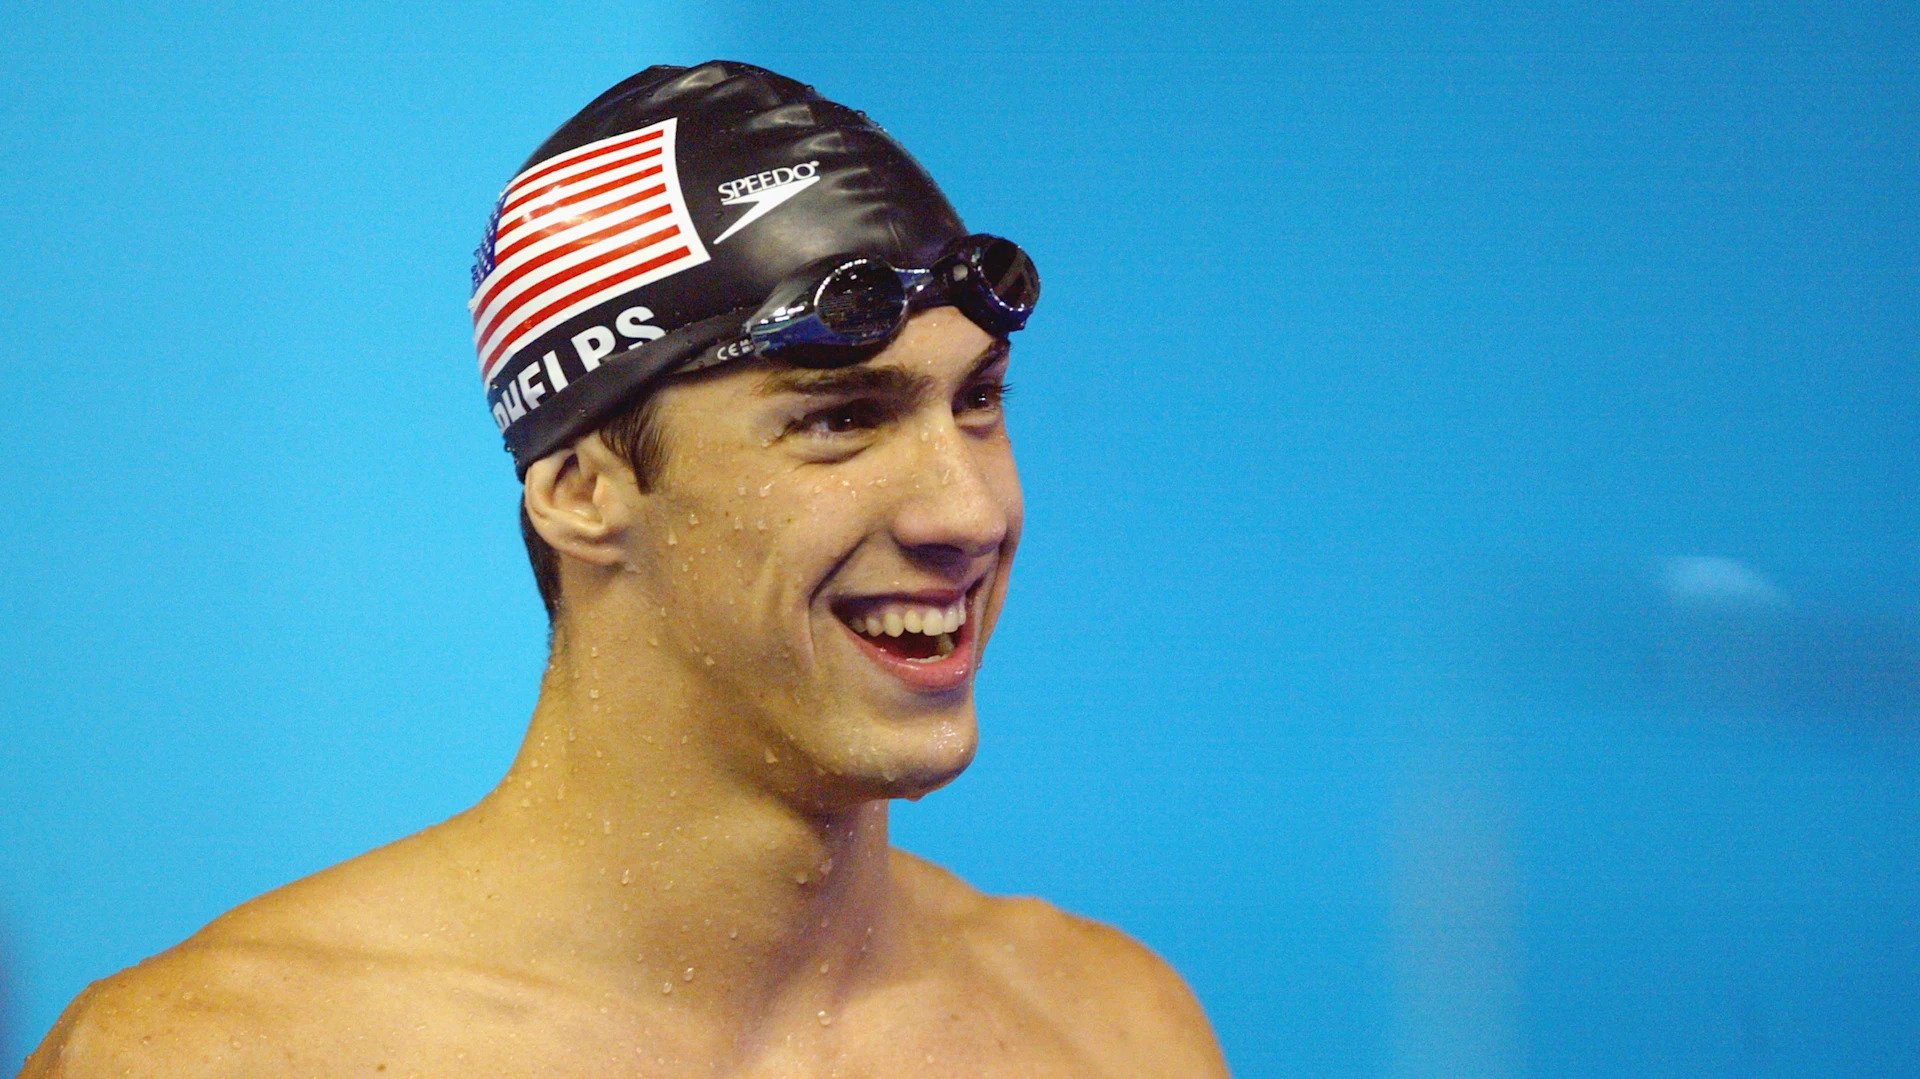 44 Facts About Michael Phelps